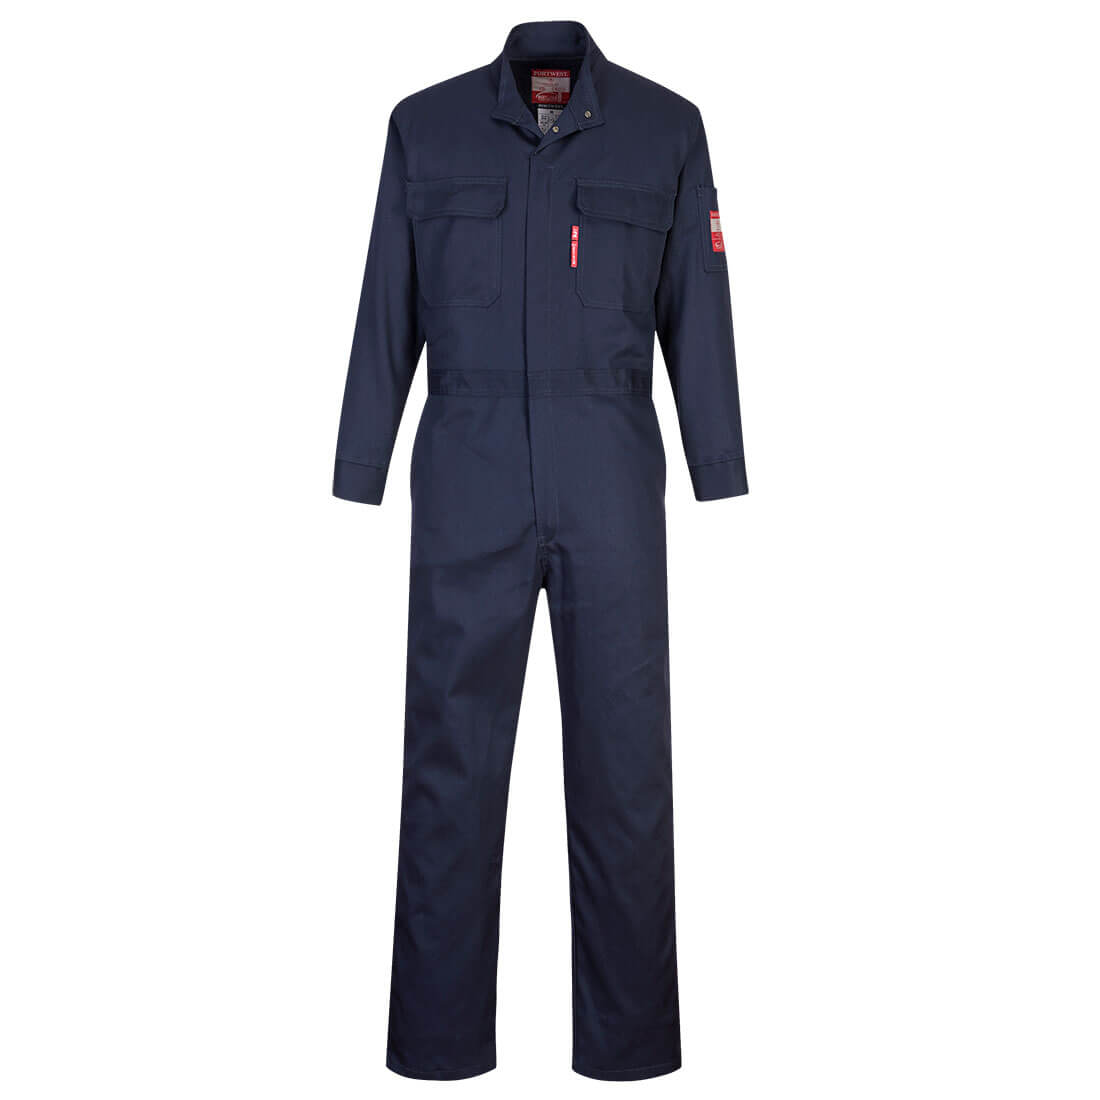 Portwest UFR88 - Bizflame 88/12 FR Coverall